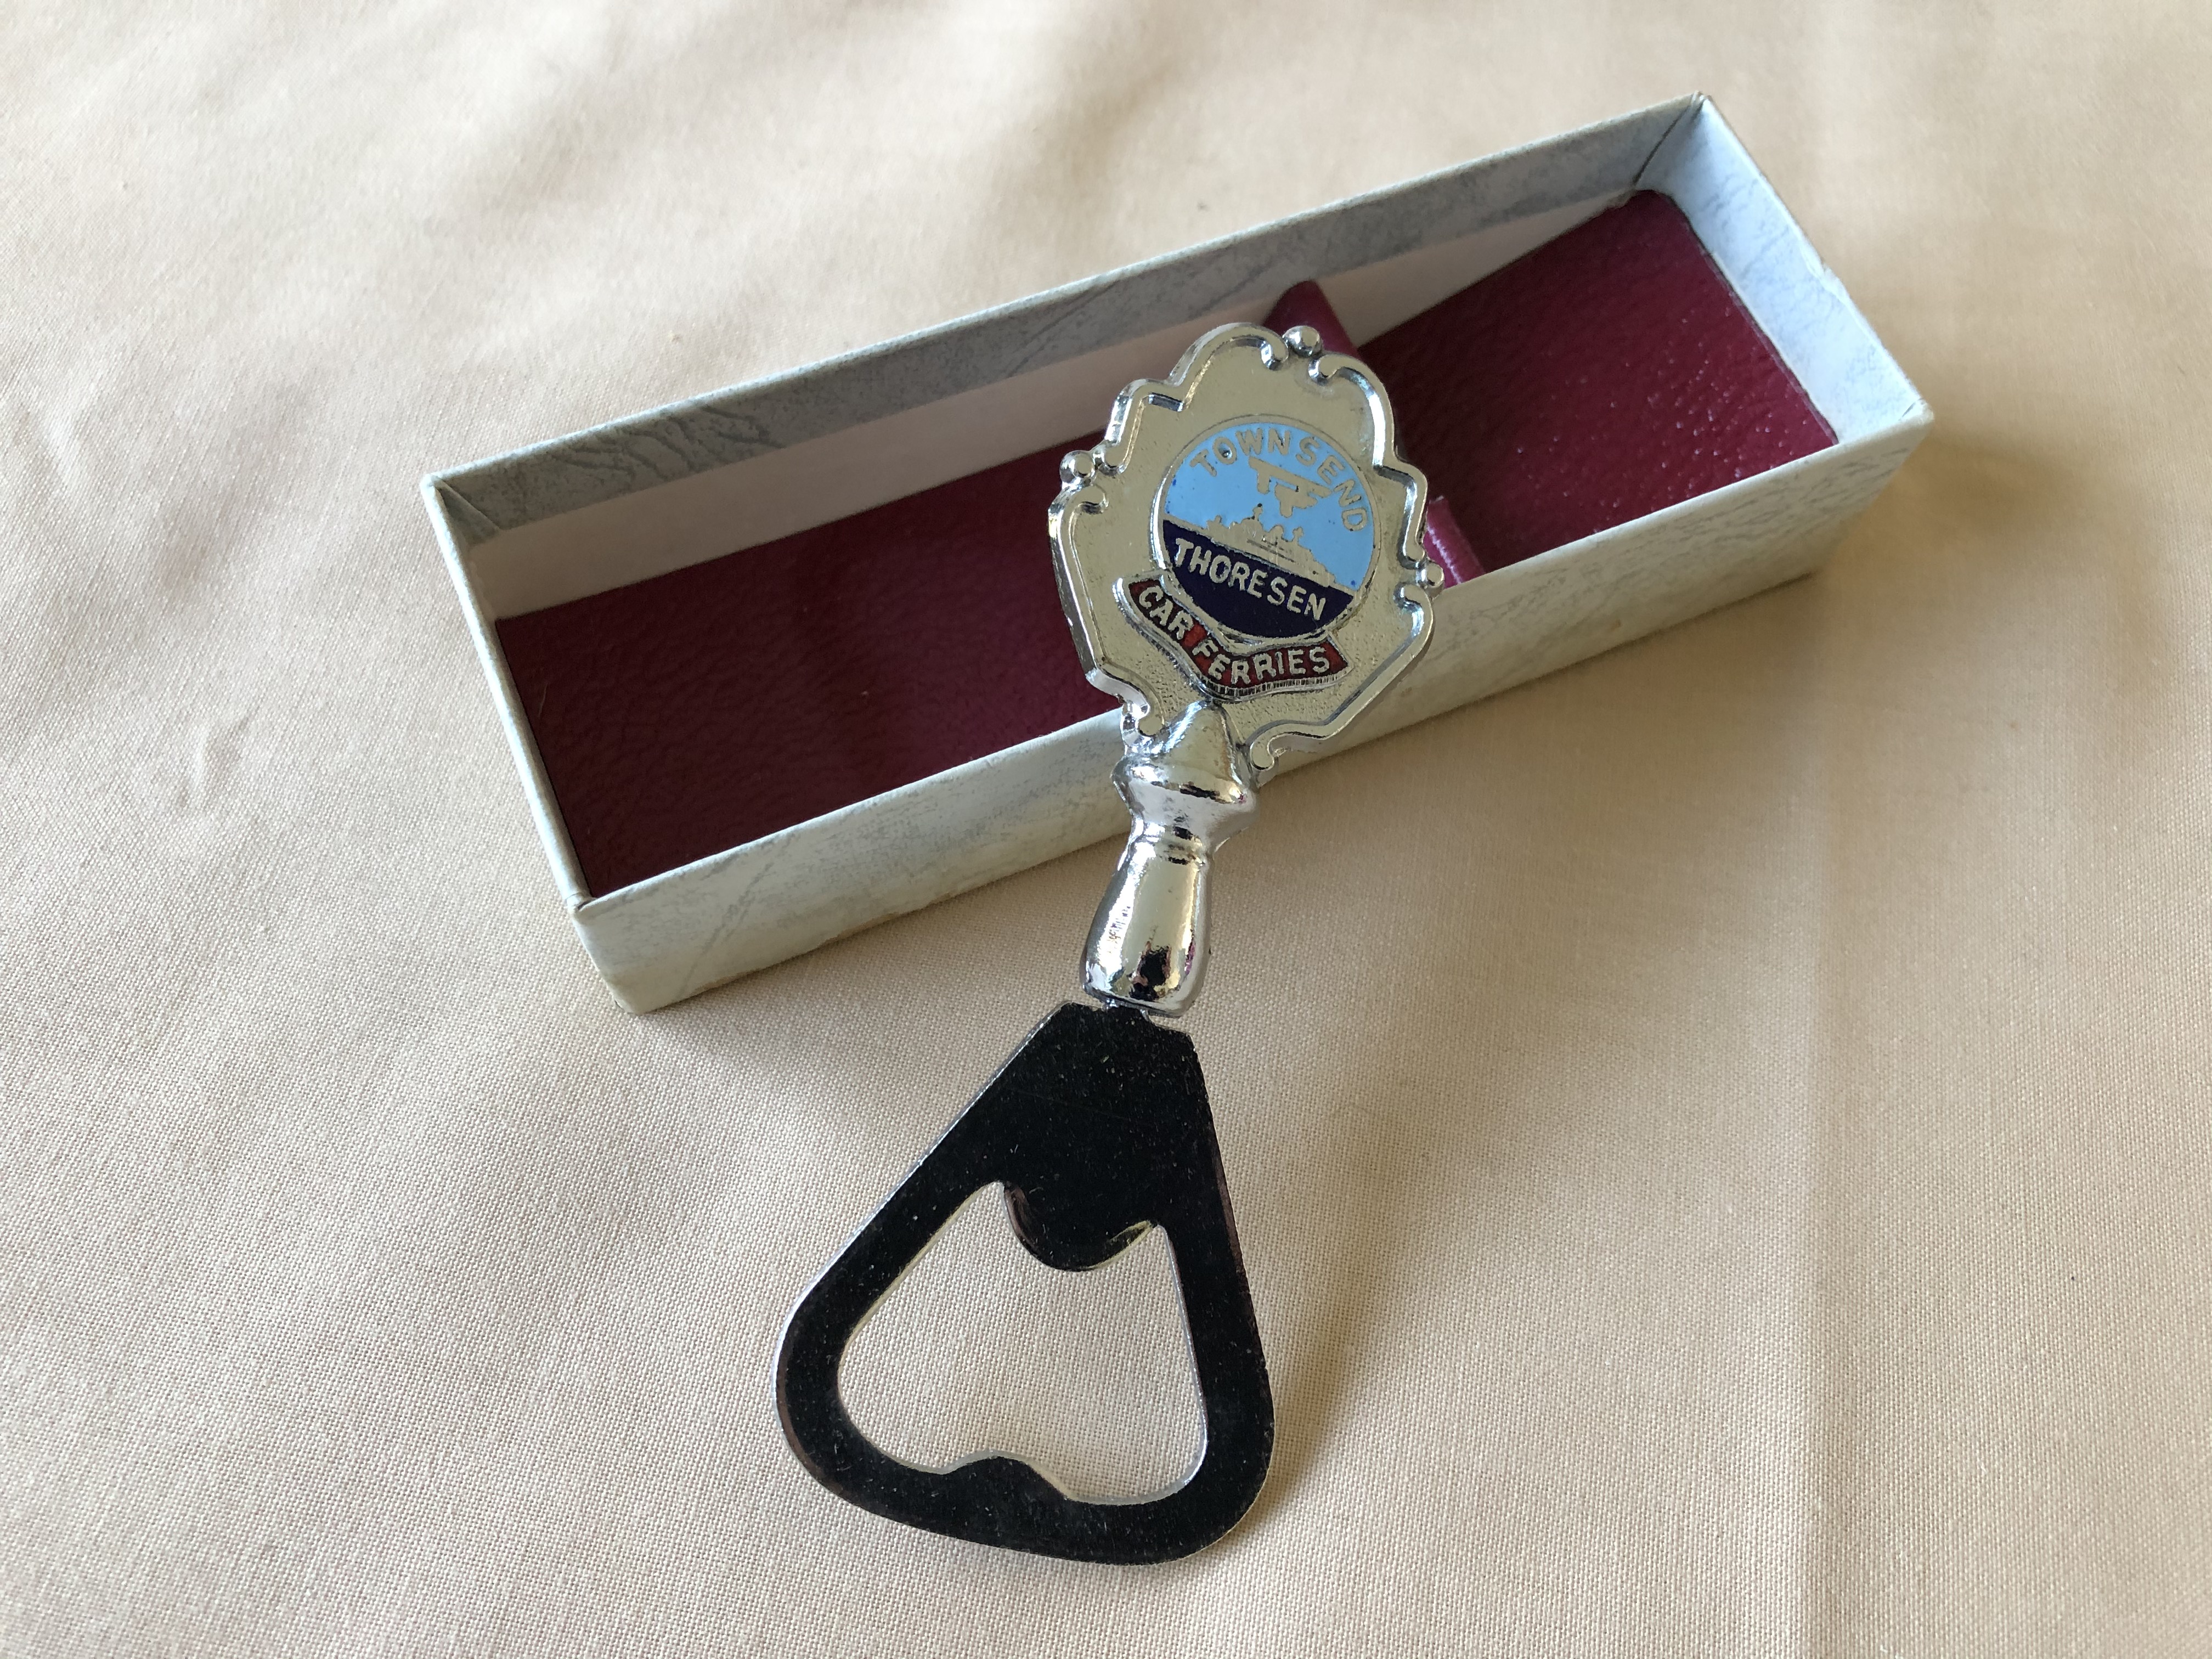 EARLY BOXED SOUVENIR BOTTLE OPENER FROM THE TOWNSEND THORESEN FERRIES COMPANY